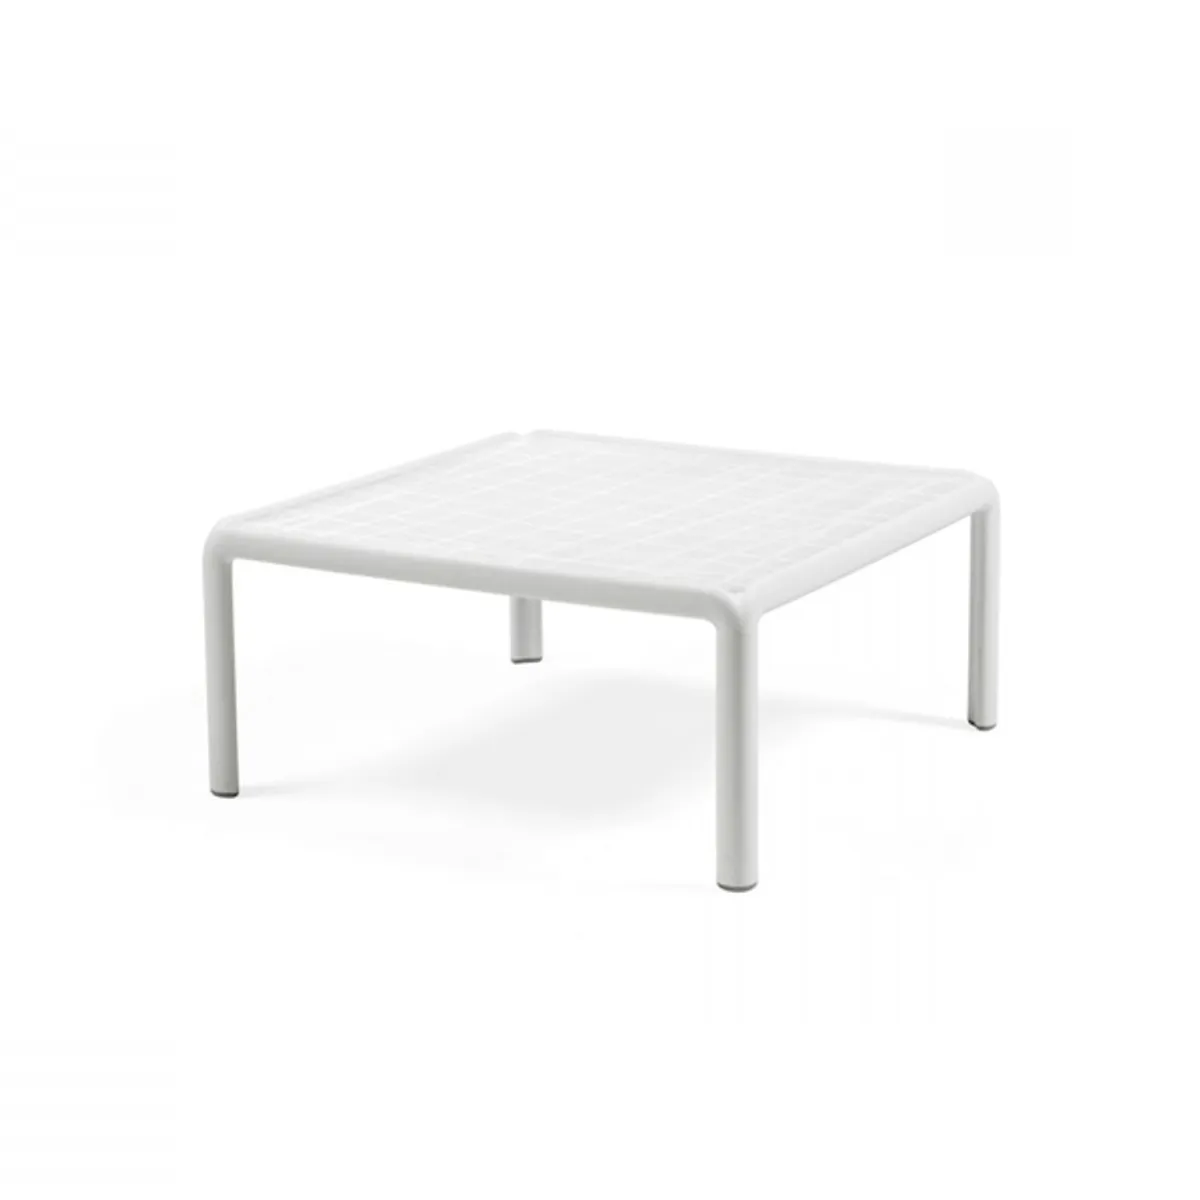 Komodo coffee table Inside Out Contracts3